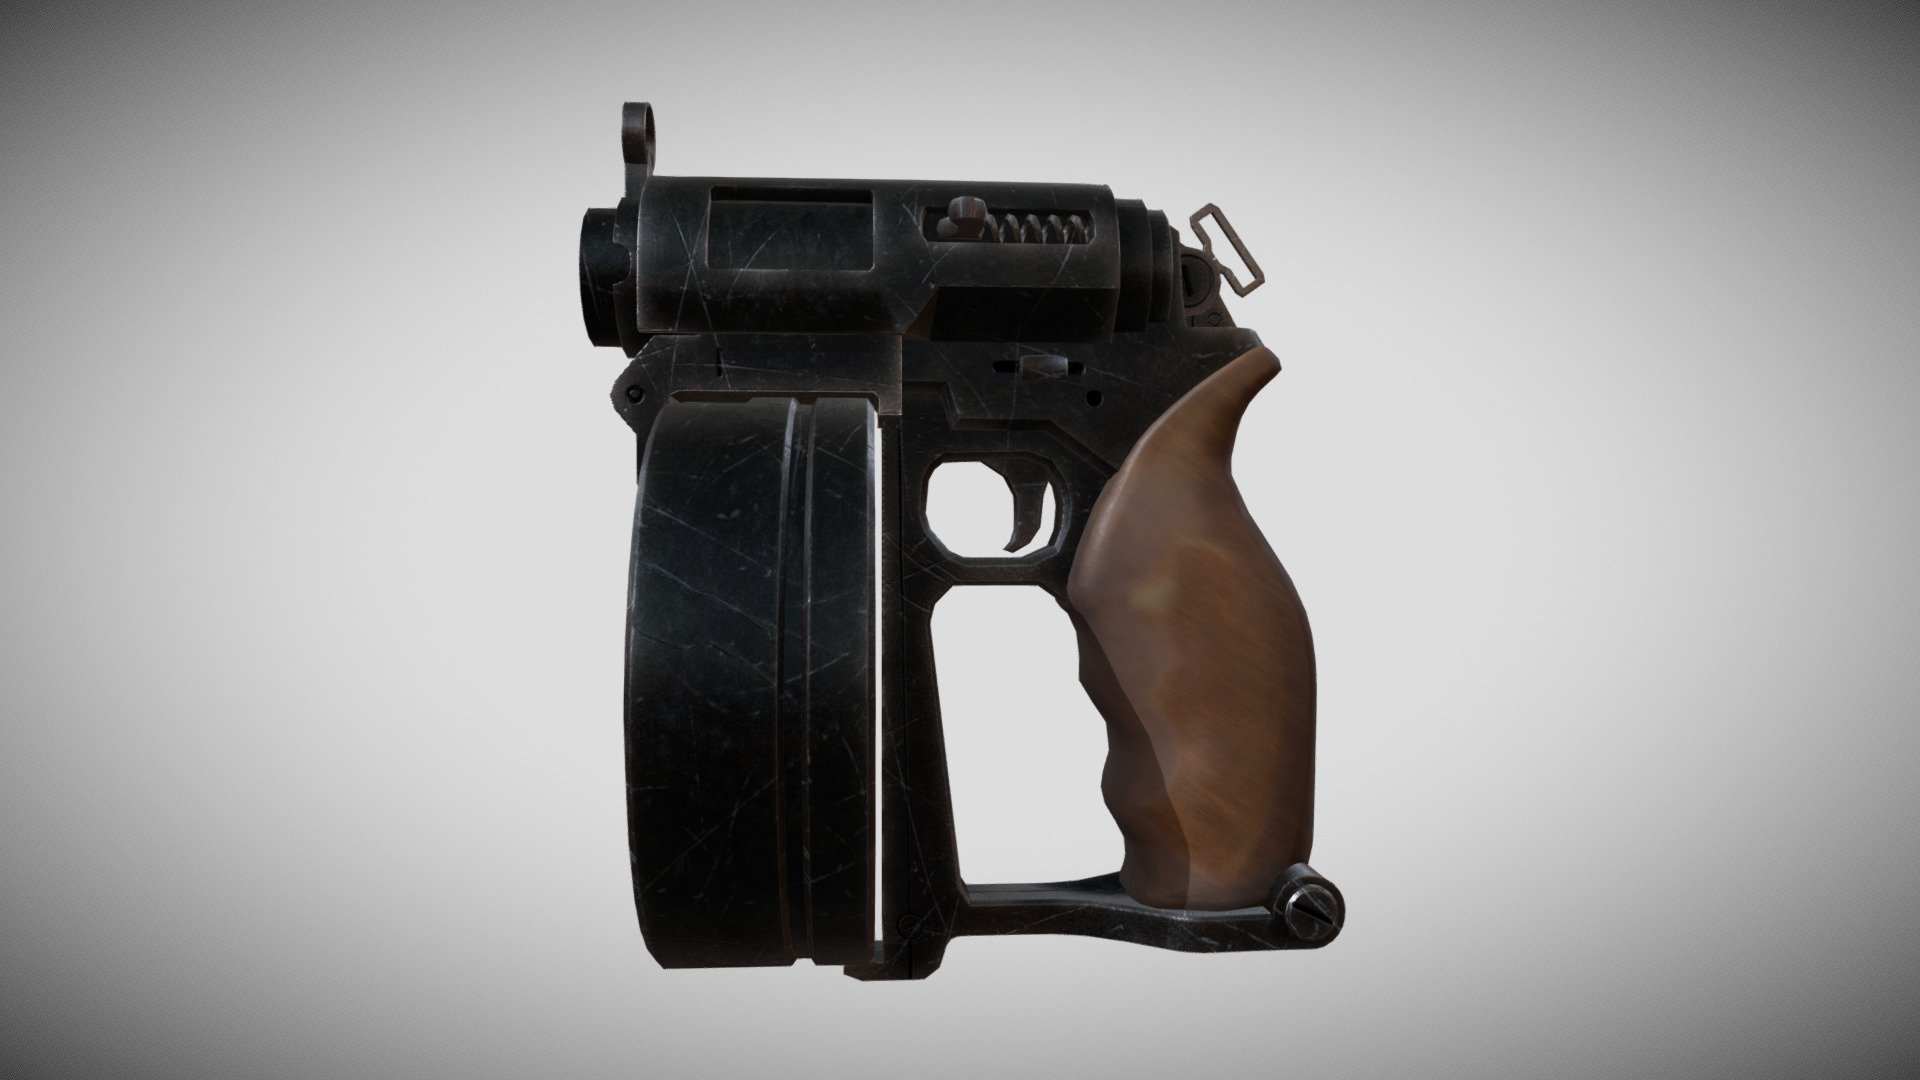 A pocket Tommy Gun! I came across this randomly on pinterest and thought it was cute and fun, so I wanted to model it. Made in Blender and textured in Substance Painter.

Original concept here: https://www.artstation.com/artwork/85gkm - Brutus Jr. (from Guido Kuip's concept sketch) - Download Free 3D model by skjoldbroder 3d model